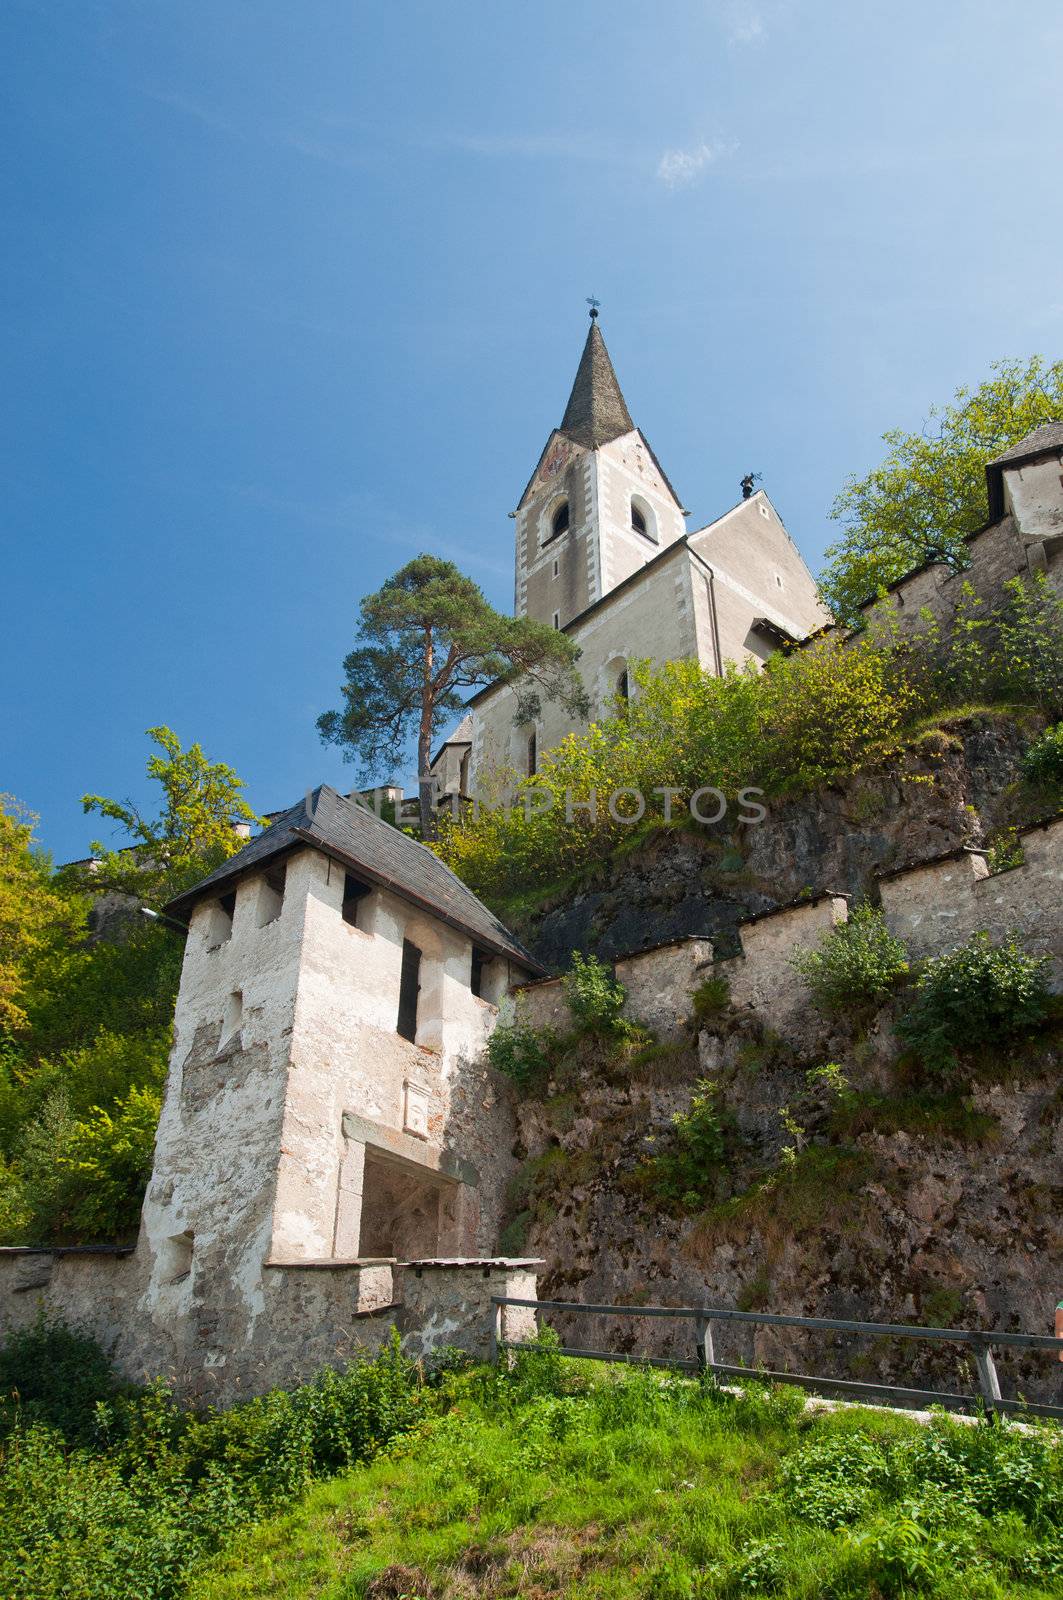 Tower medieval castle Hohostervits, located on the mountain, Austria, K�rnten